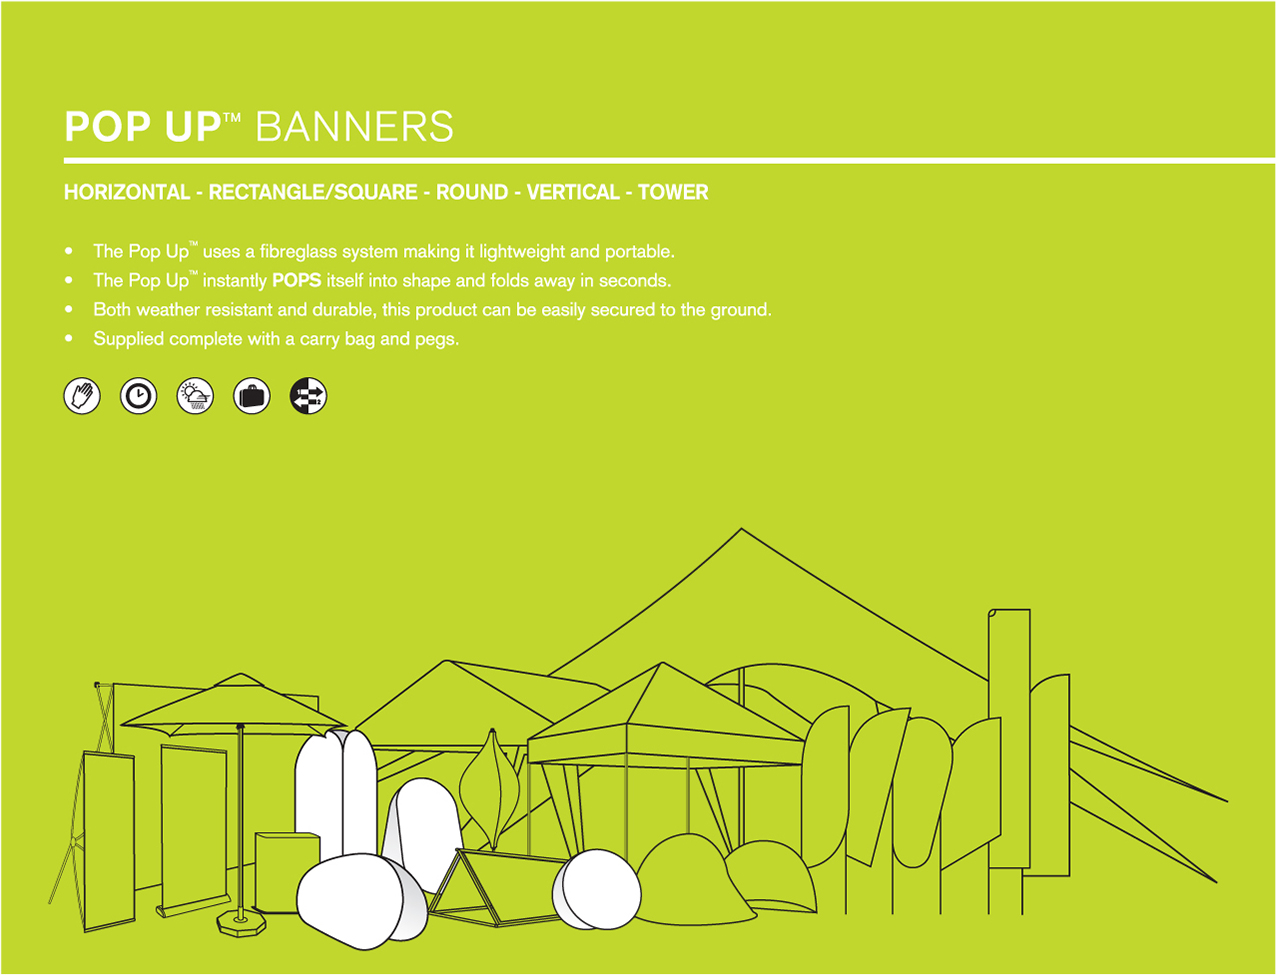 20121009124607_14-pop-up-banners